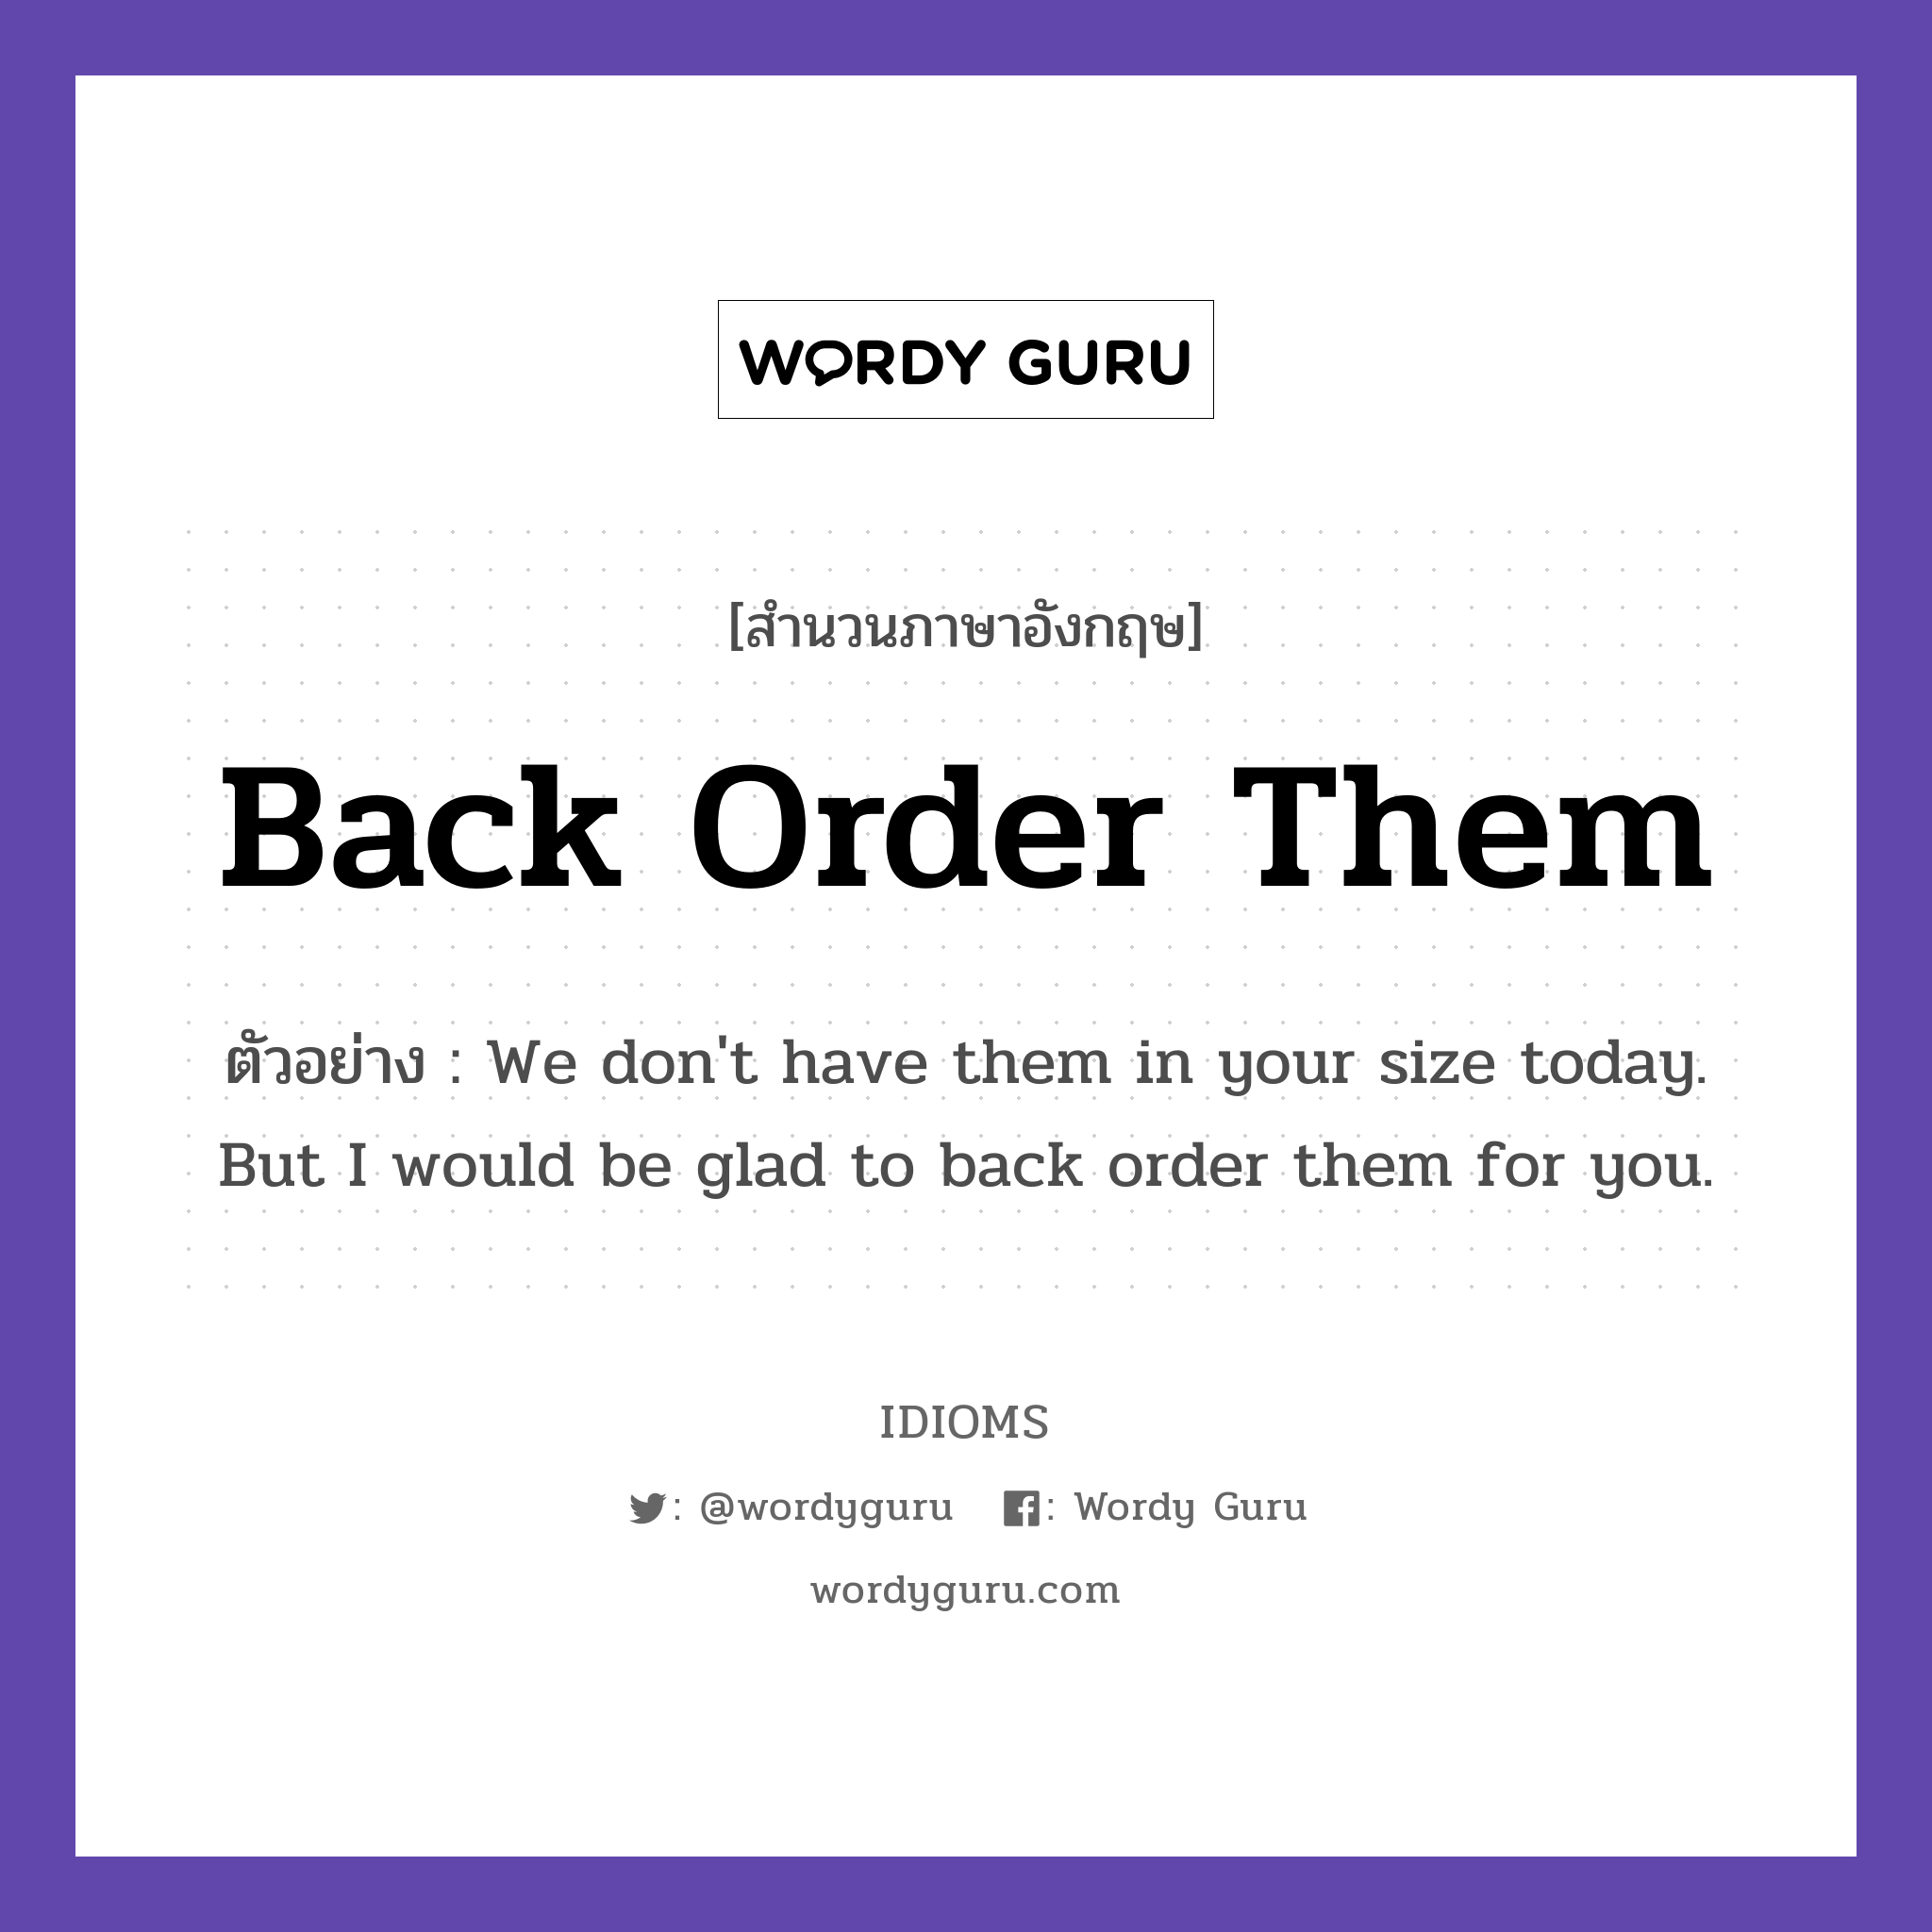 Back Order Them แปลว่า?, สำนวนภาษาอังกฤษ Back Order Them ตัวอย่าง We don't have them in your size today. But I would be glad to back order them for you.